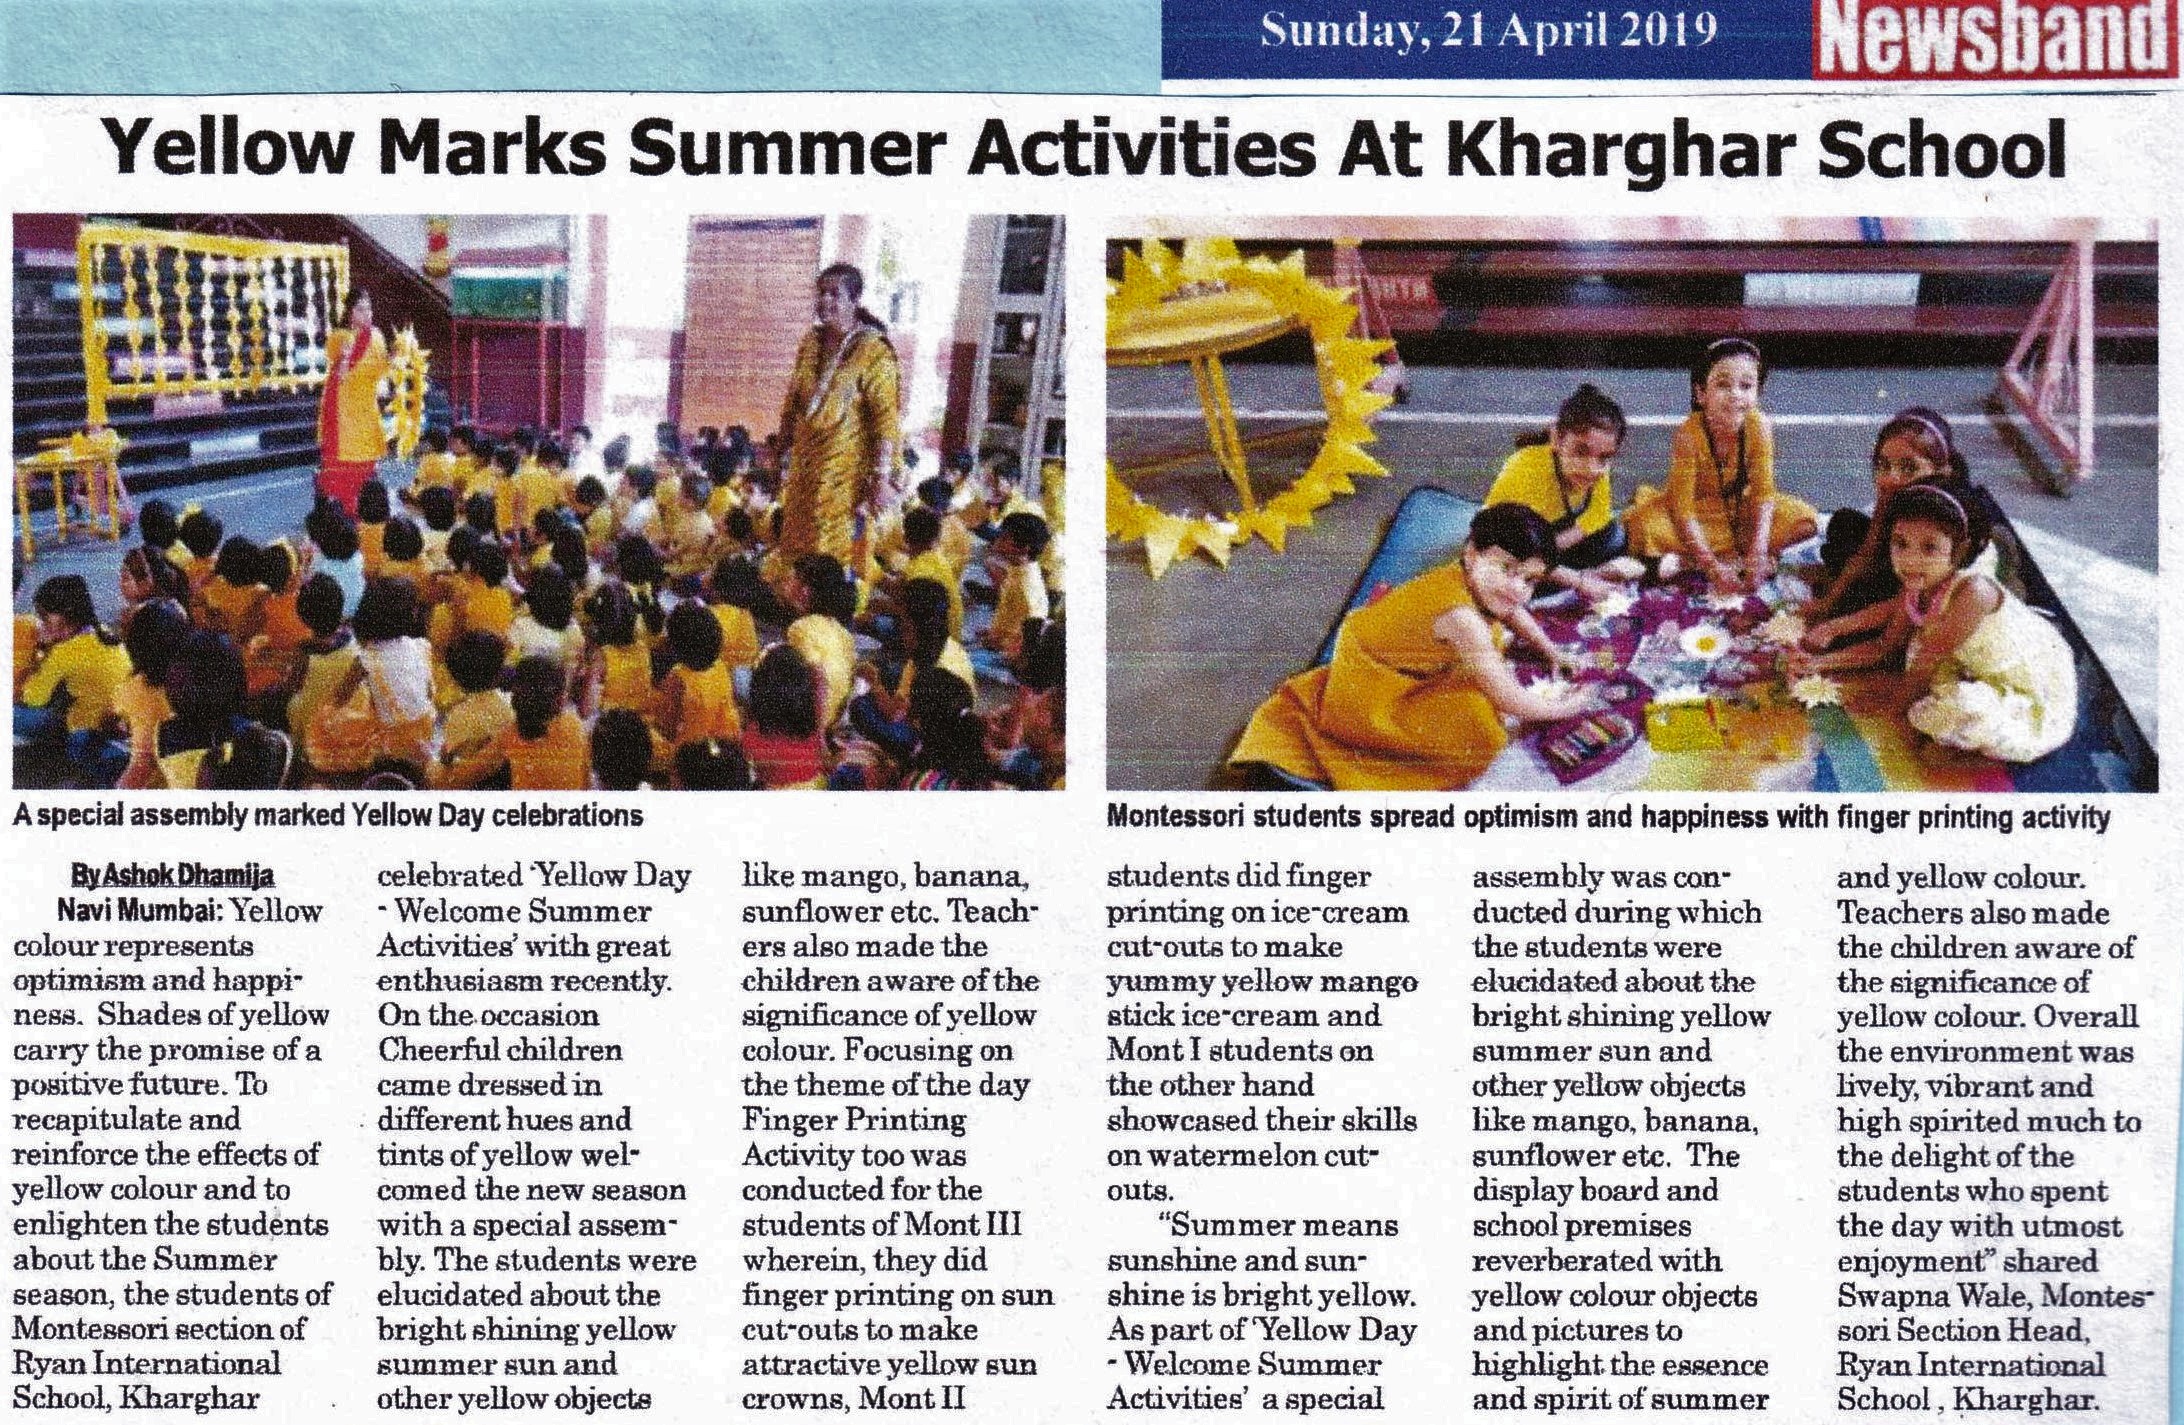 Yellow marks summer activities at Kharghar school was mentioned in Newsband - Ryan International School, Kharghar